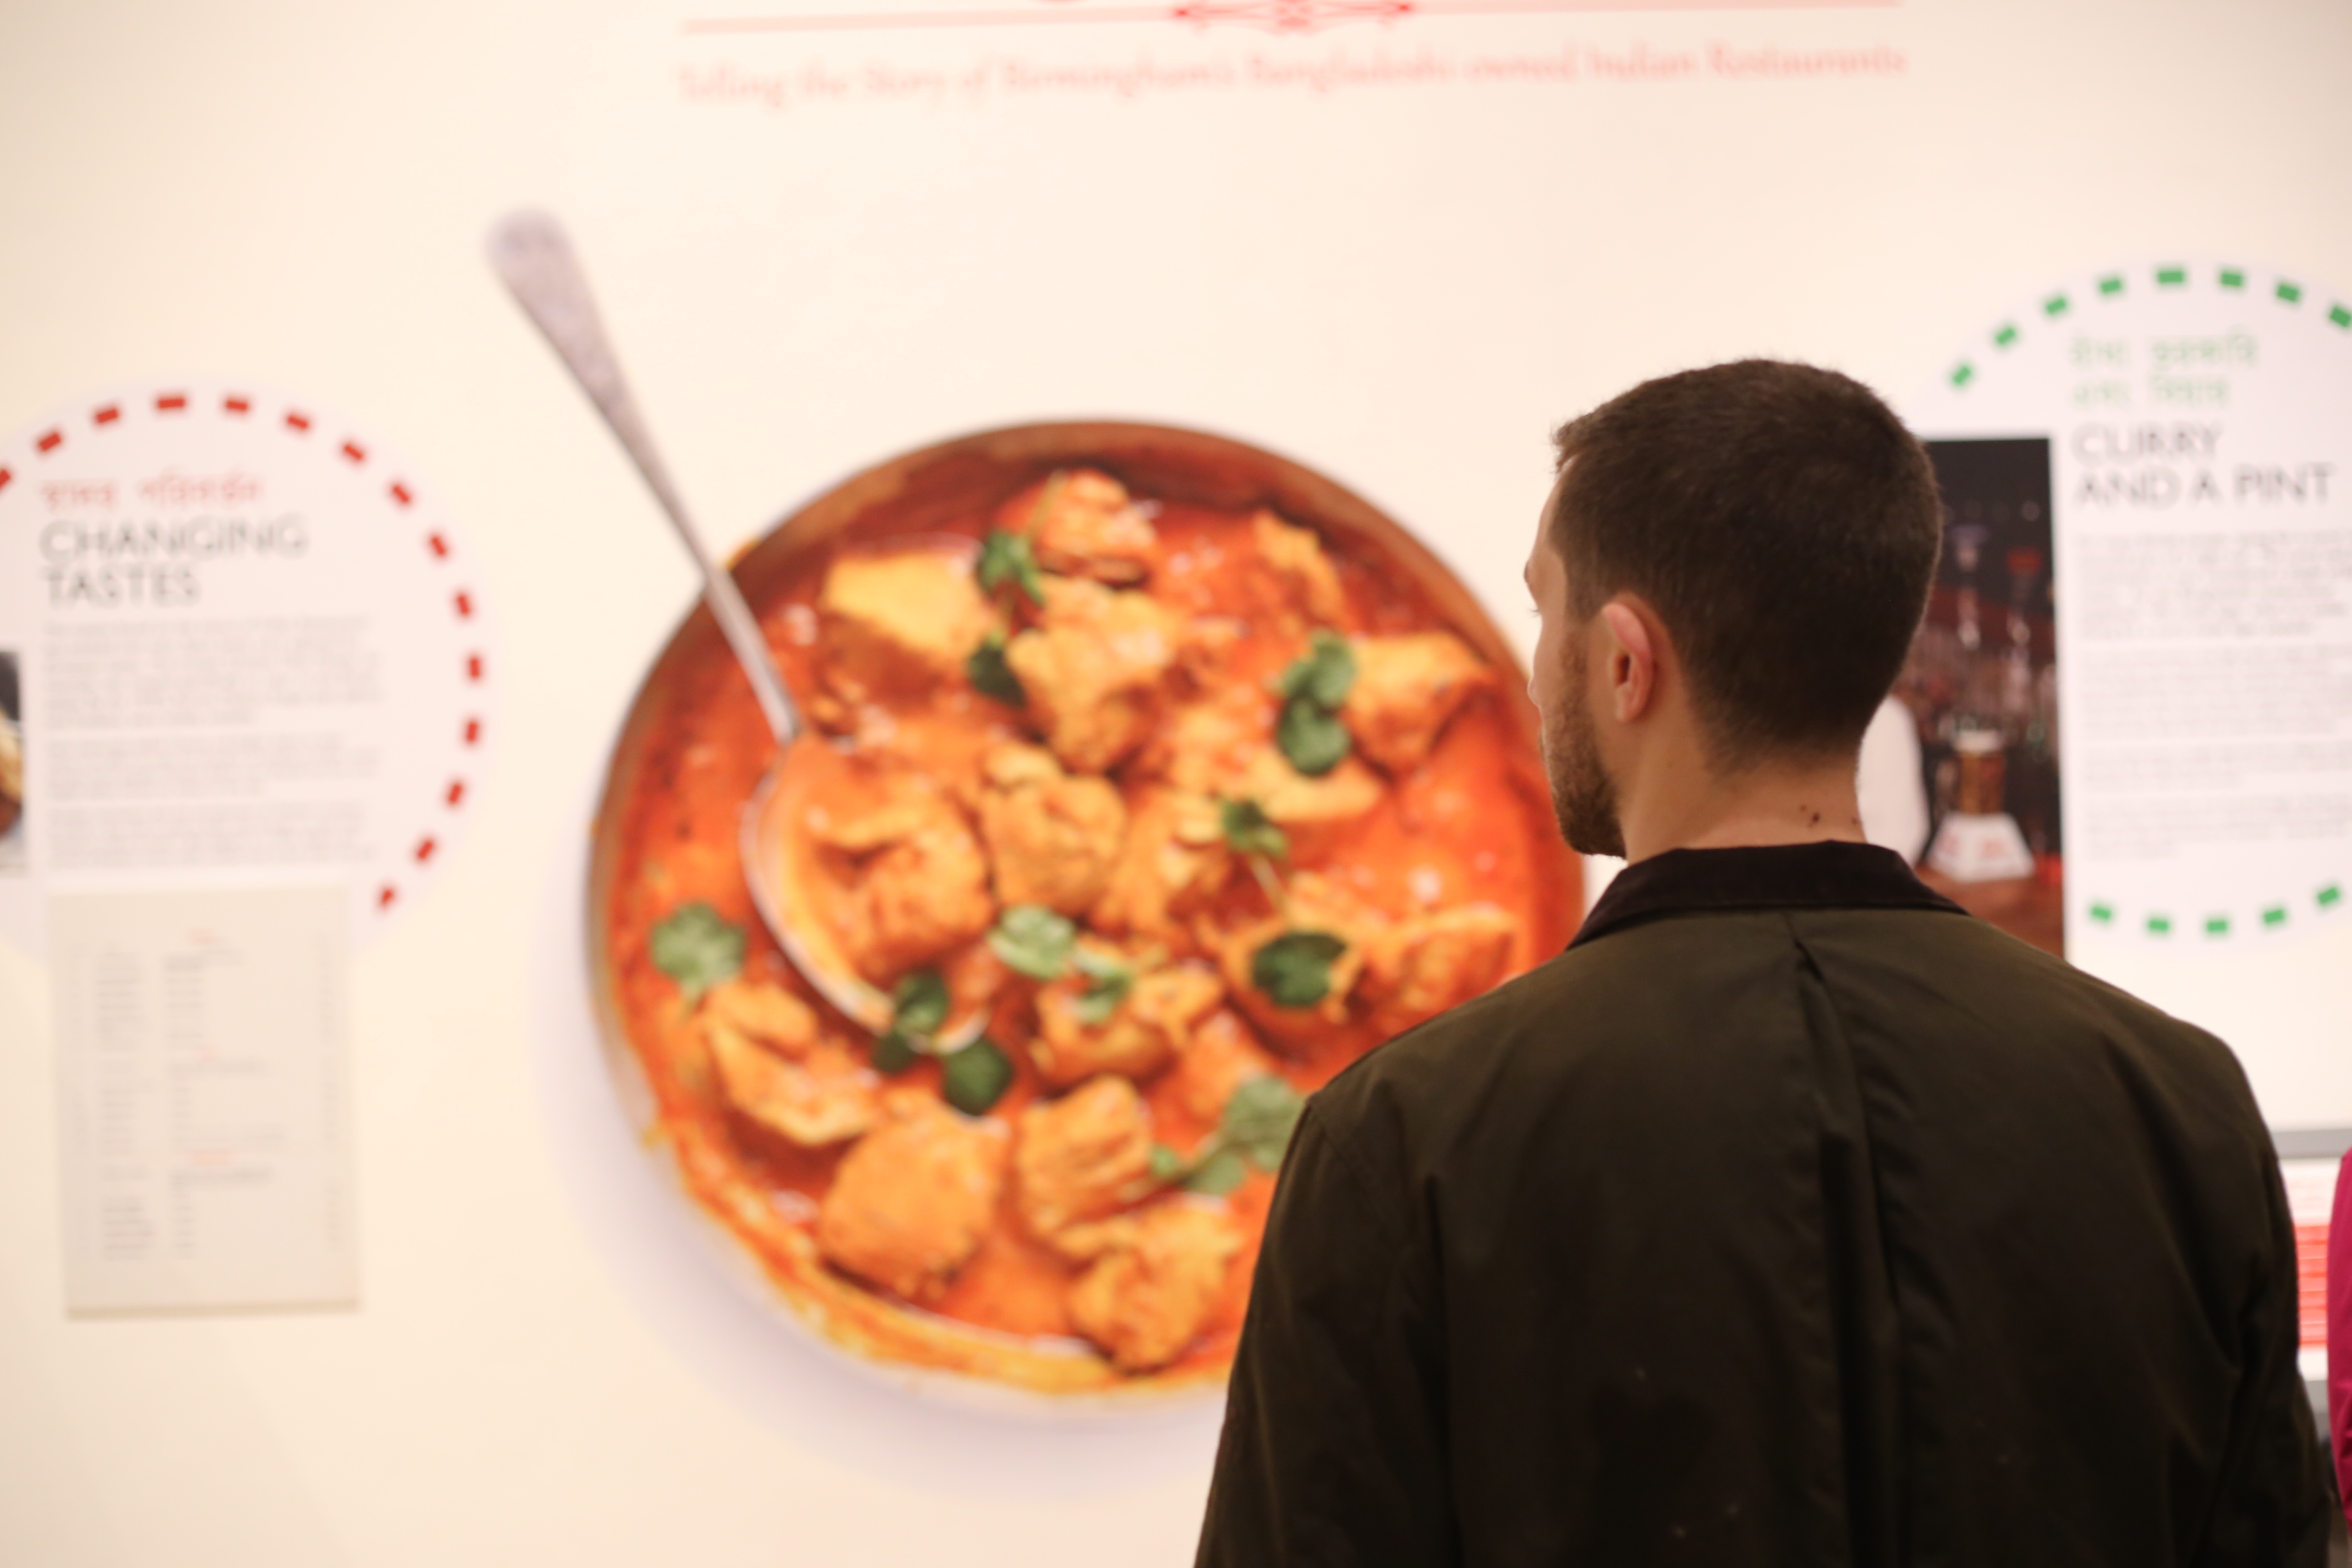 The rise of the curry has led to it being firmly integrated within contemporary UK culture